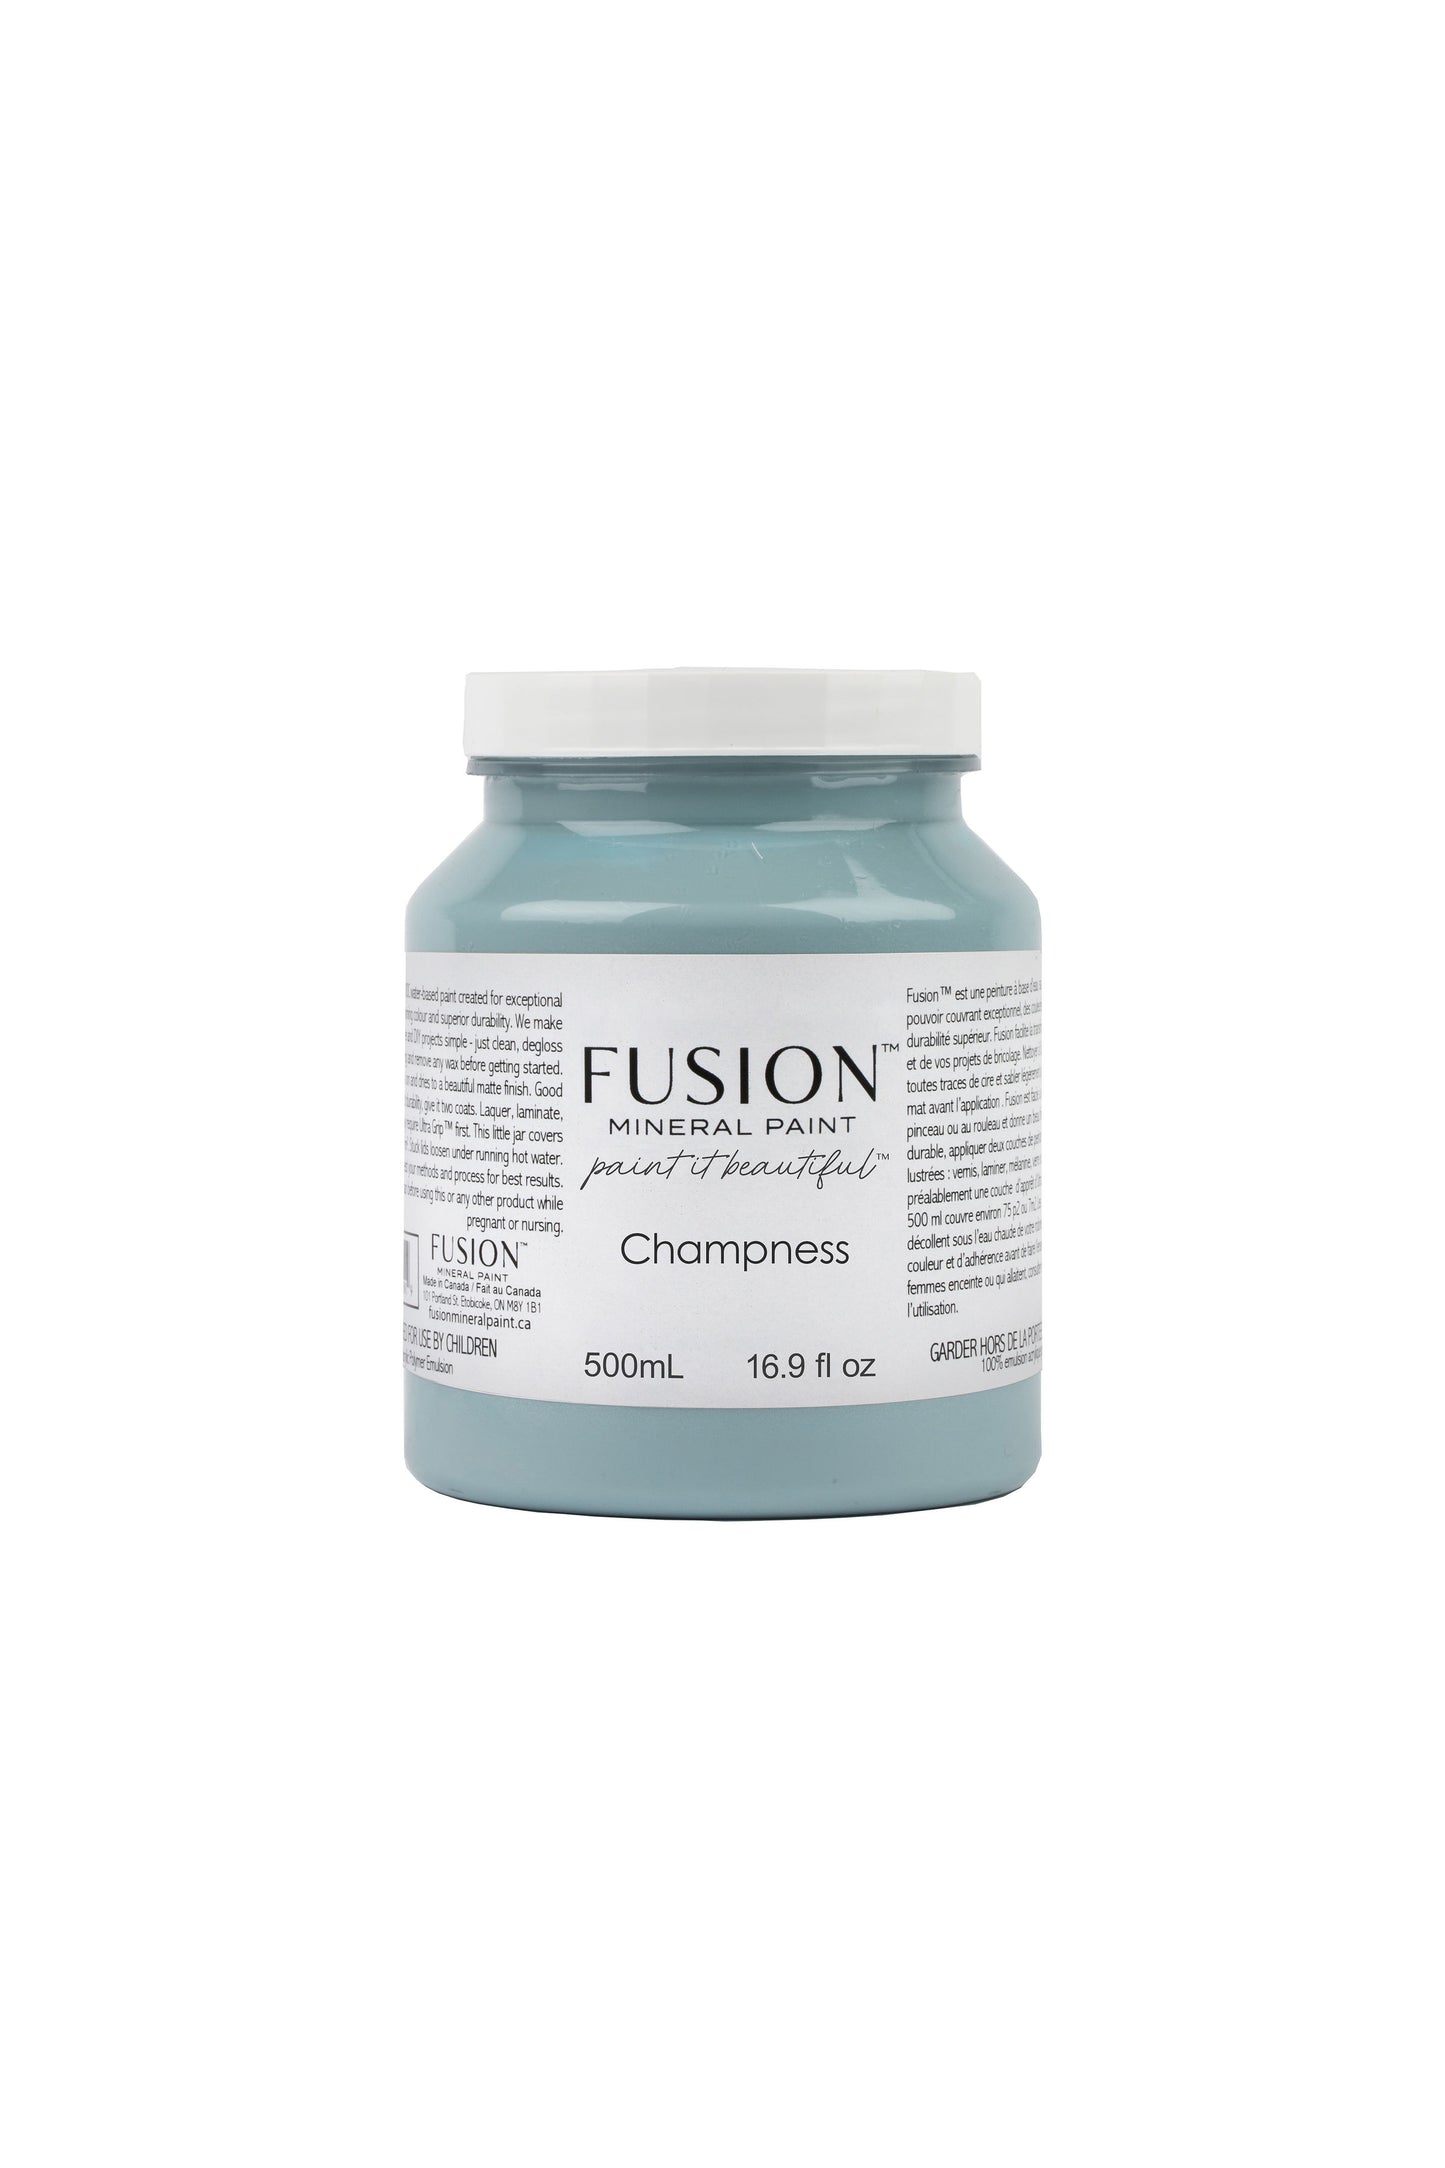 FUSION MINERAL PAINT- Champness